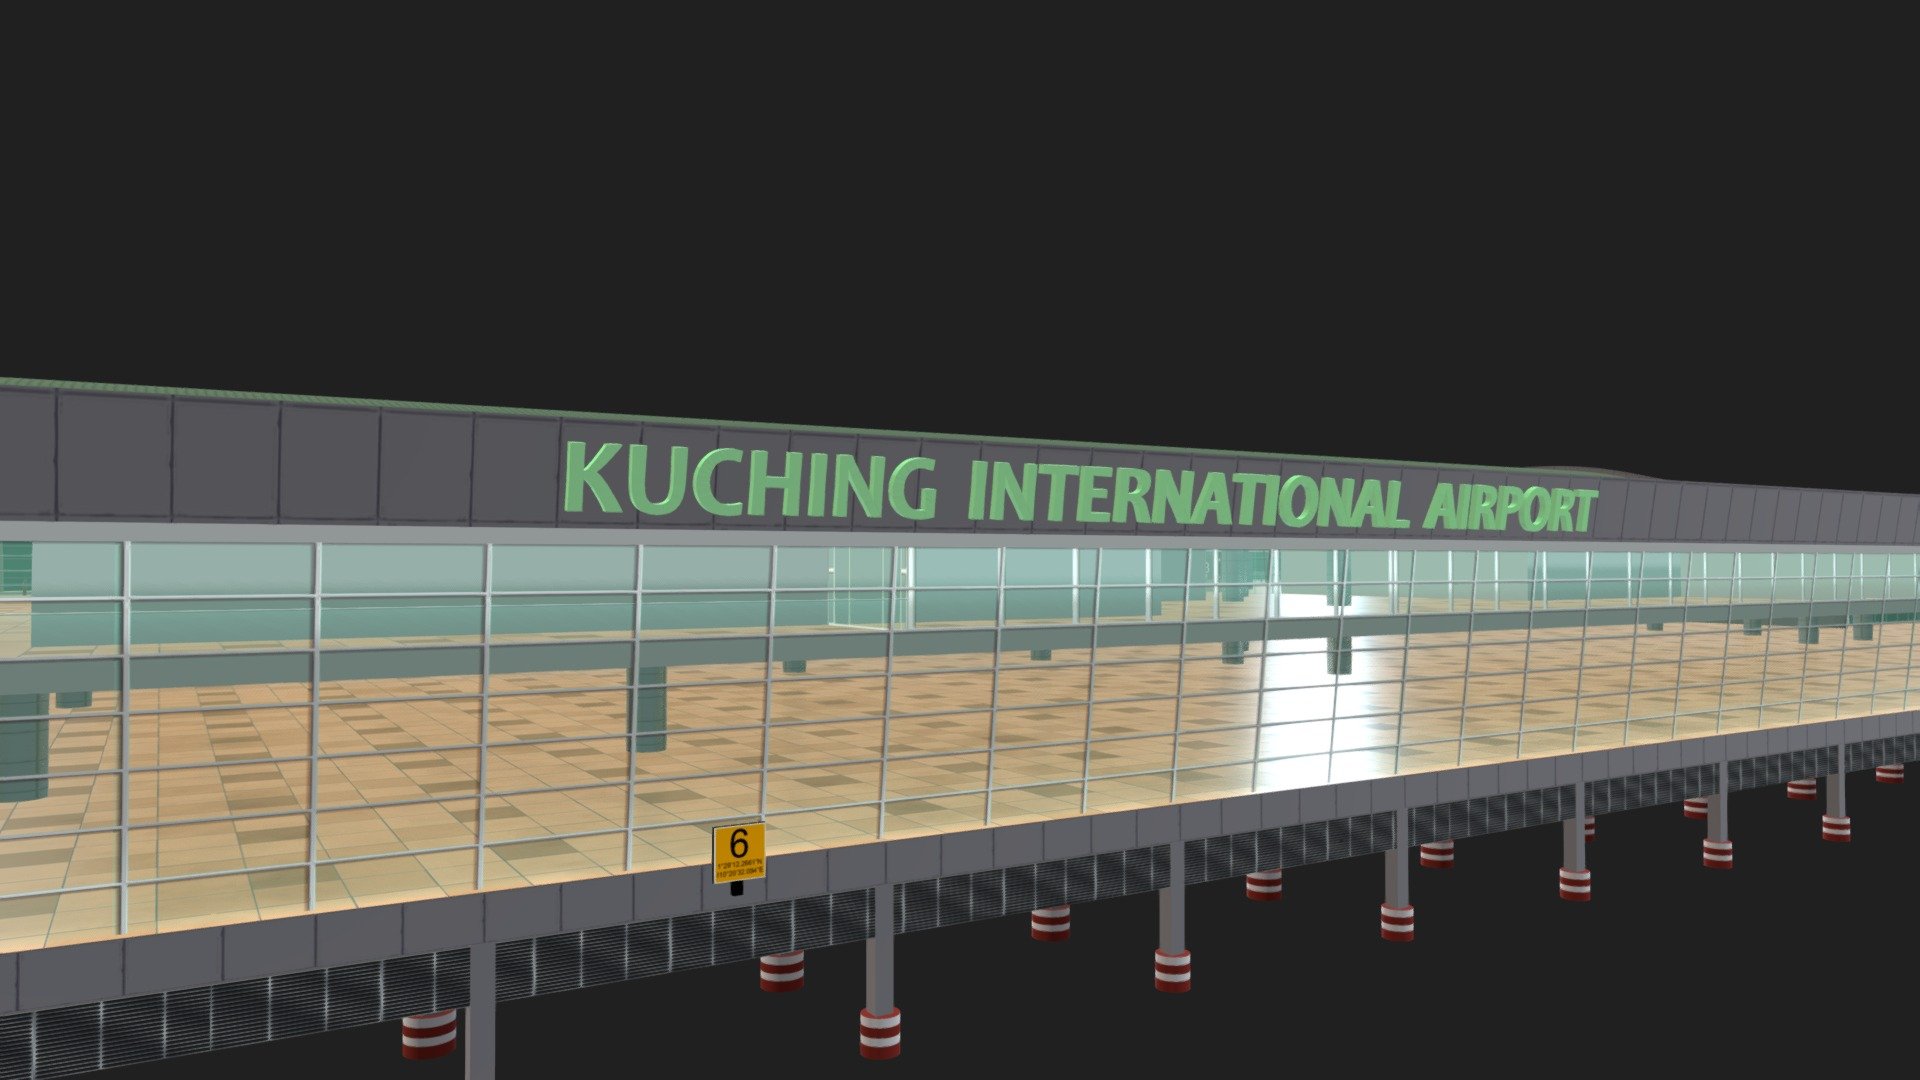 Kuching International Airport (Initialised: KIA) (IATA: KCH, ICAO: WBGG) is an international airport serving the entire southwestern region of Sarawak, Malaysia. It is located 11 km (6.8 mi) south of Kuching city centre. The airport also colocated with the RMAF Kuching, home to the No. 7 Squadron RMAF - Kuching International Airport - 3D model by Hornbill Simulations (@h0rnb1ll) 3d model